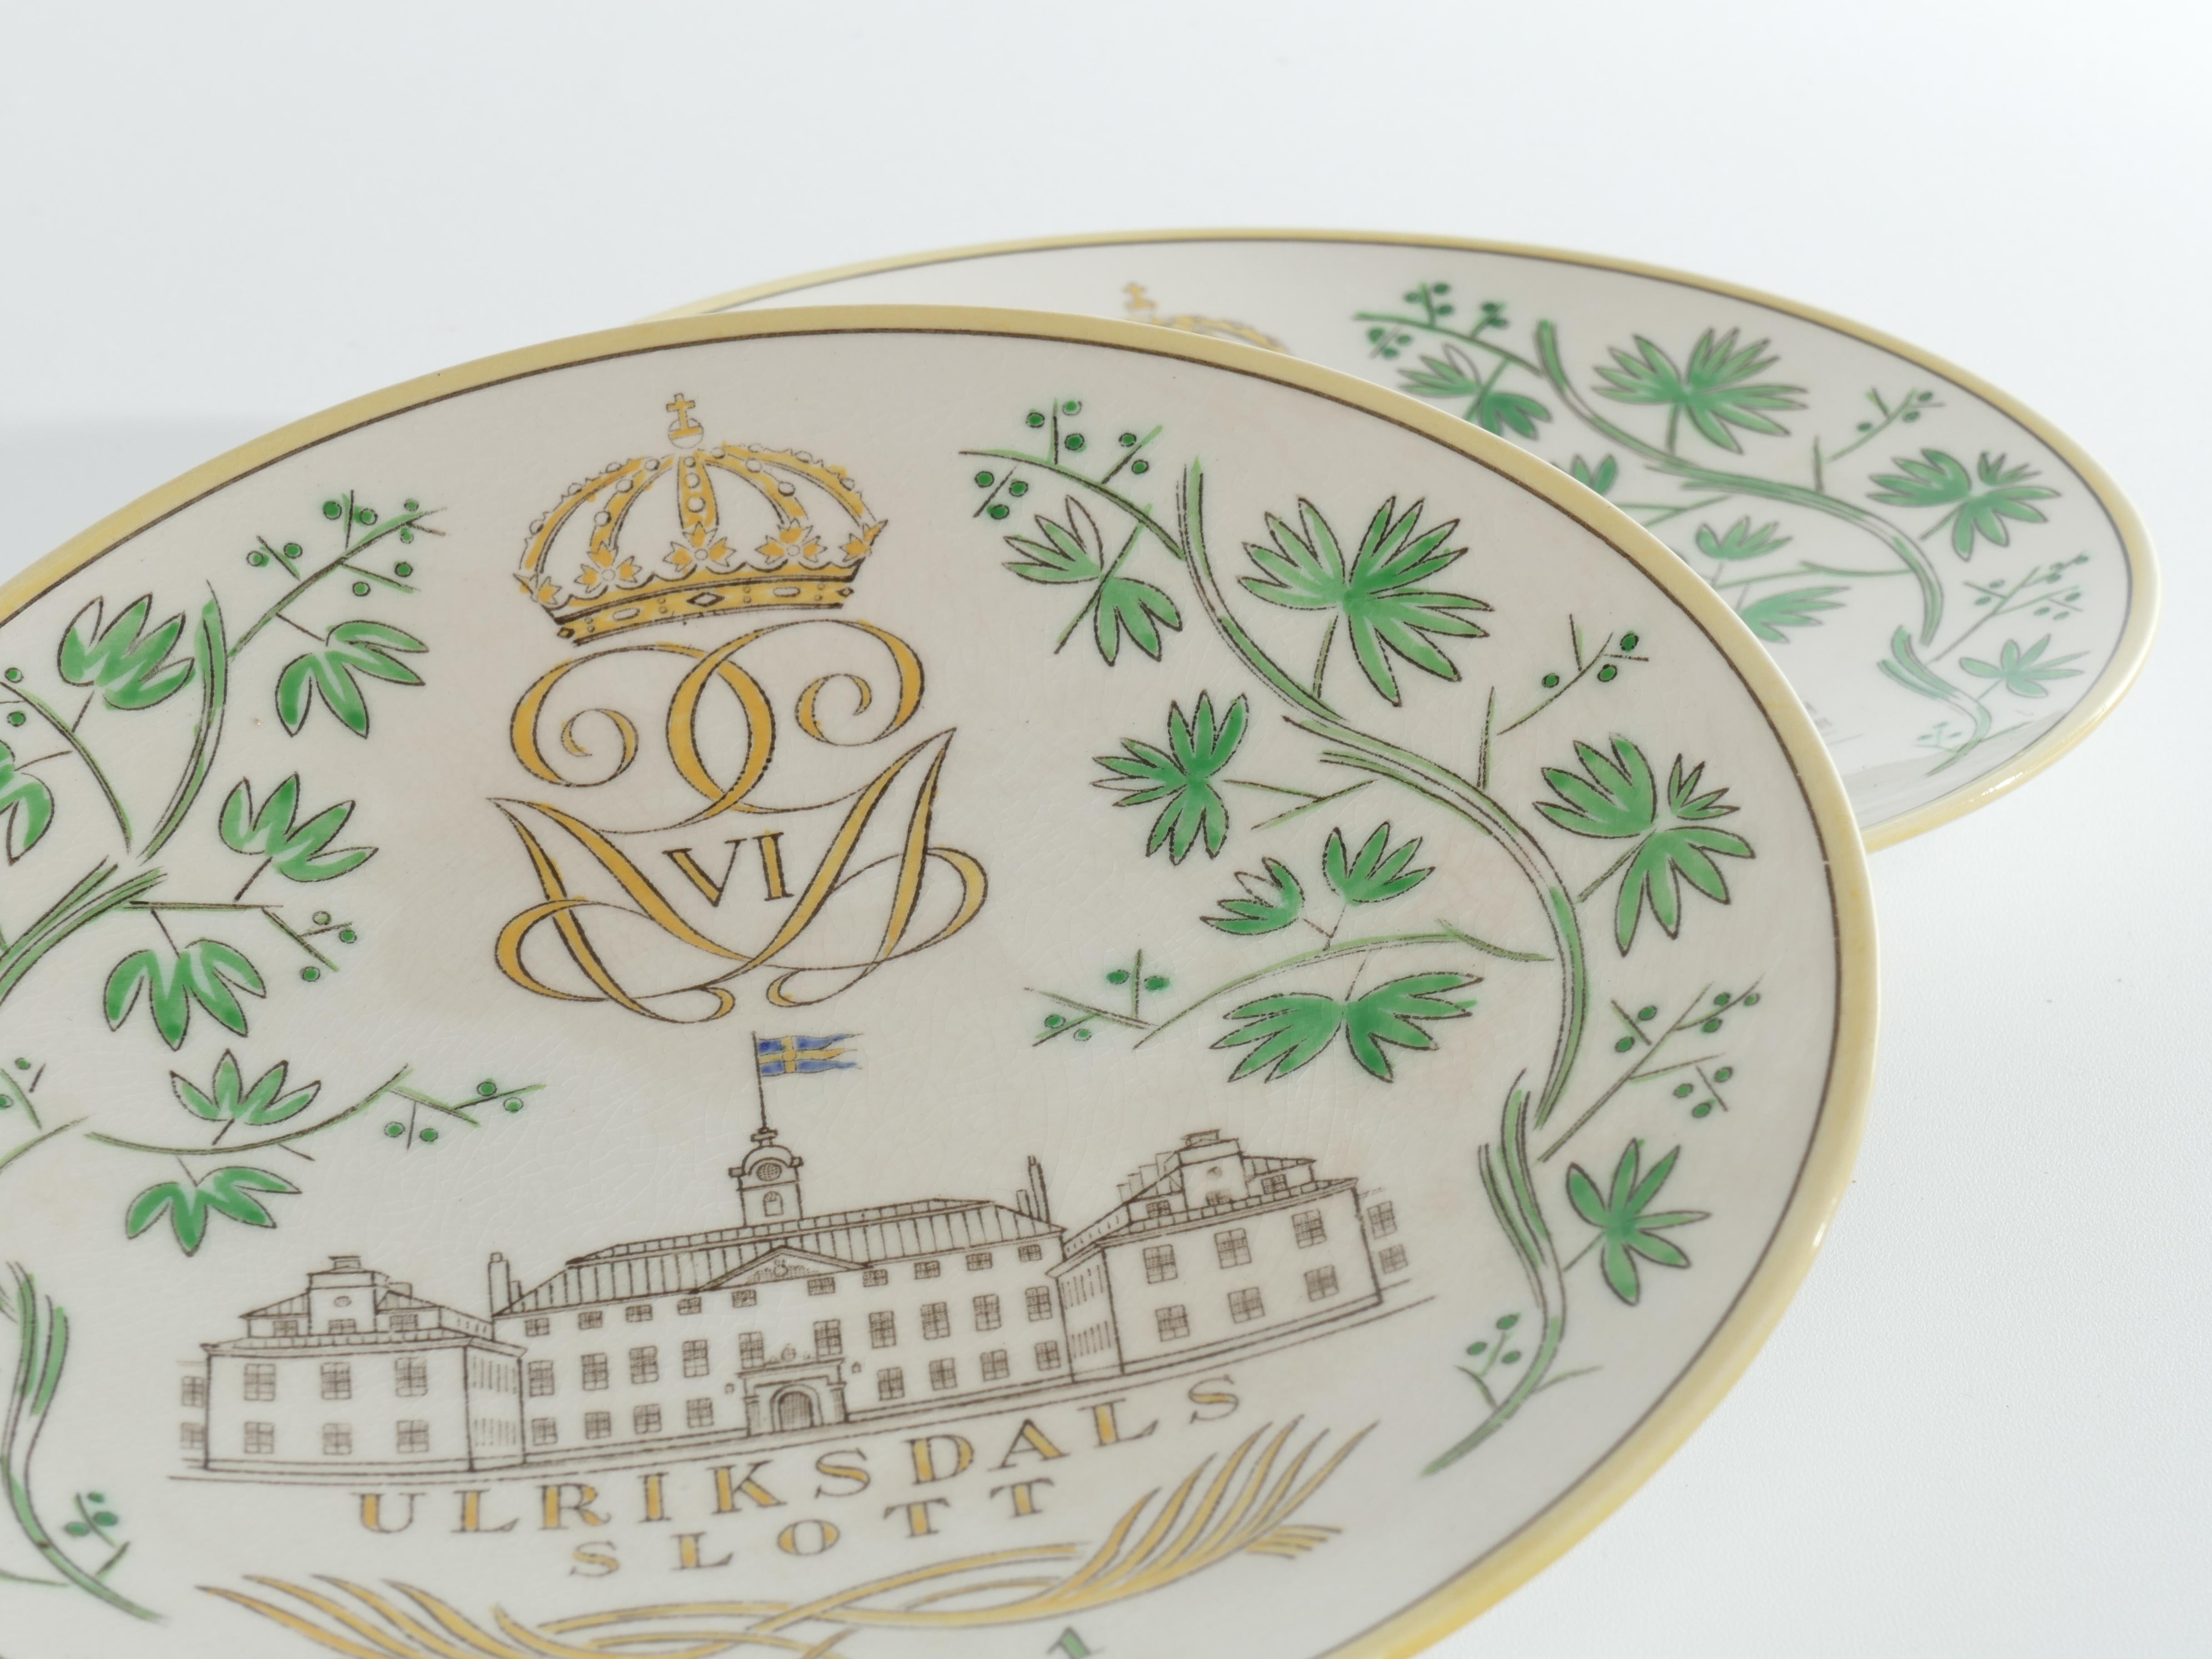 Swedish Grace Plates with Ulriksdal Palace in Yellow and Green by Gefle 1951 For Sale 1